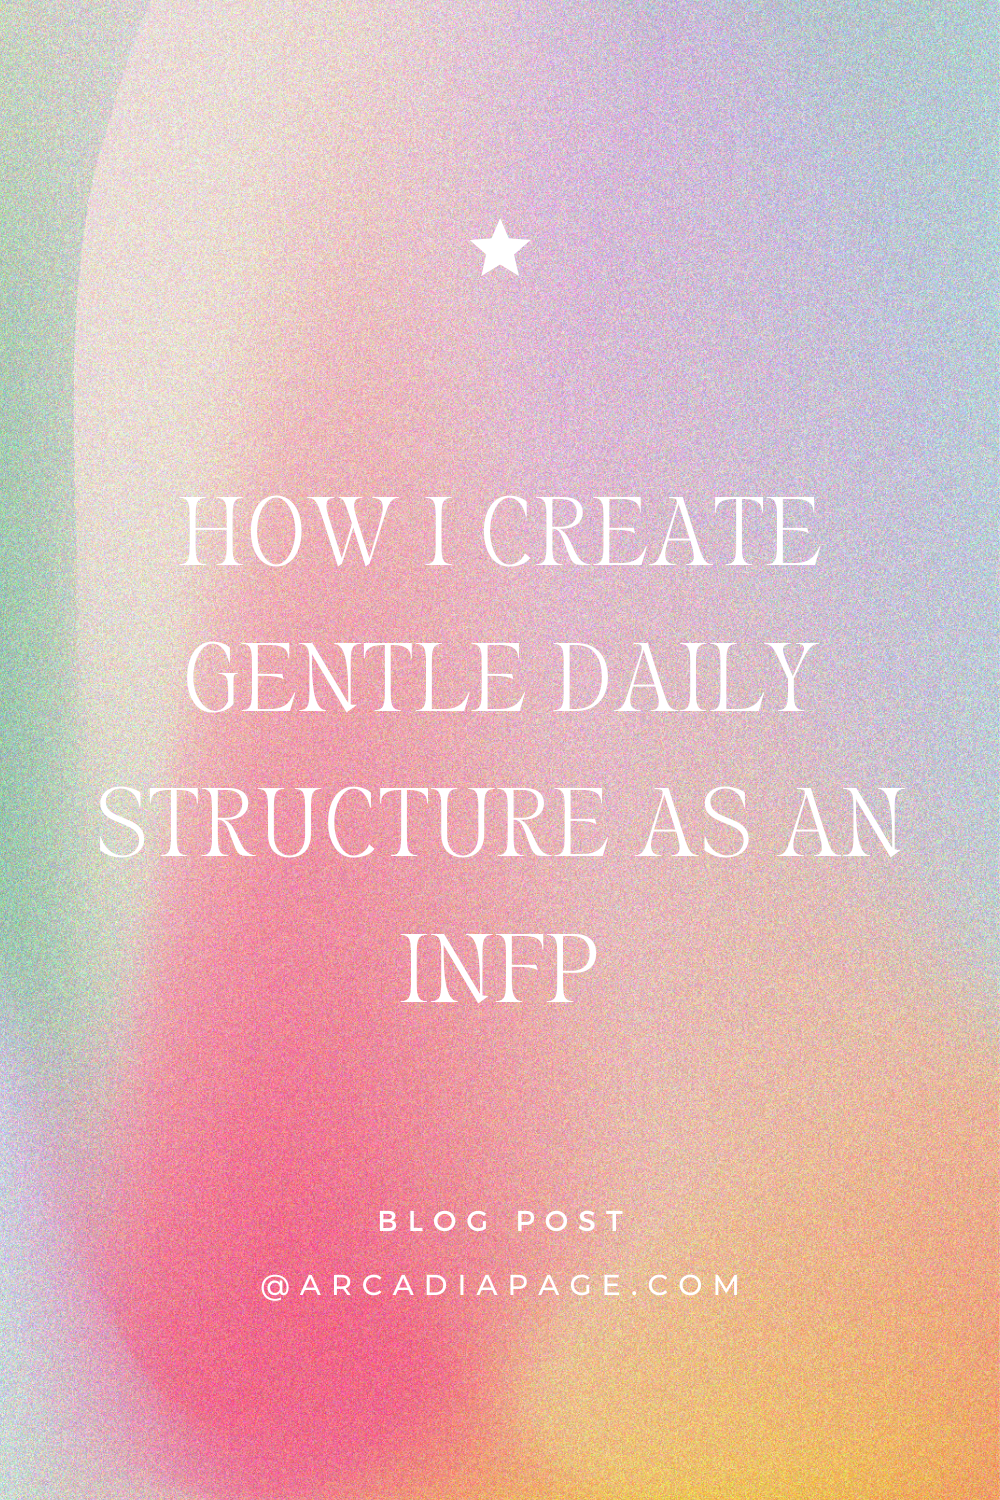 How I Create Gentle Daily Structure as an INFP